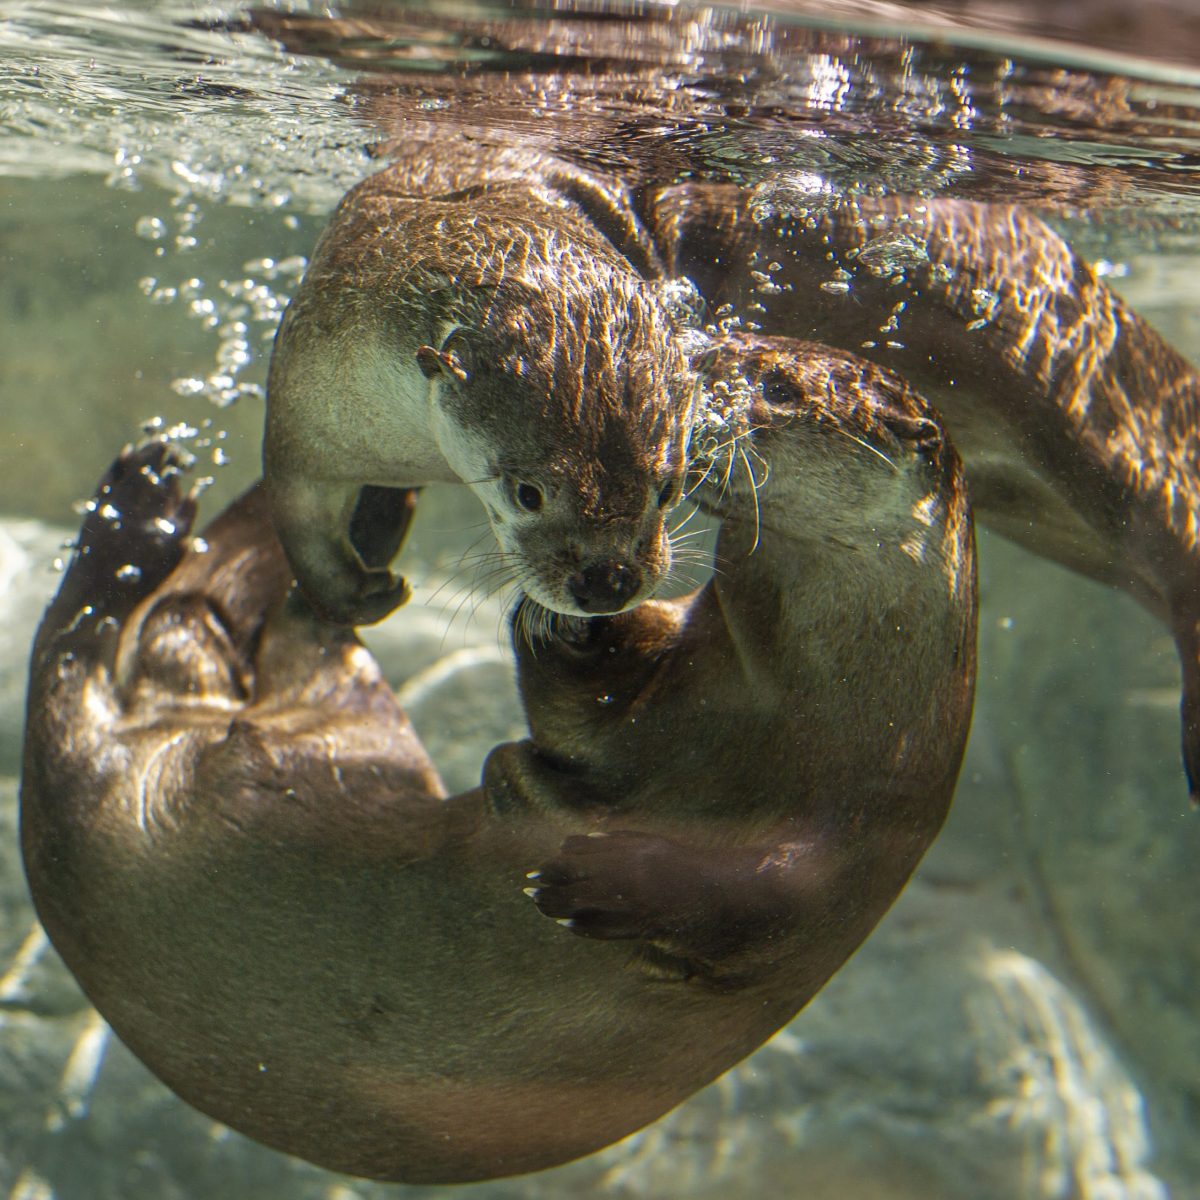 Two North American River Otters play underwater